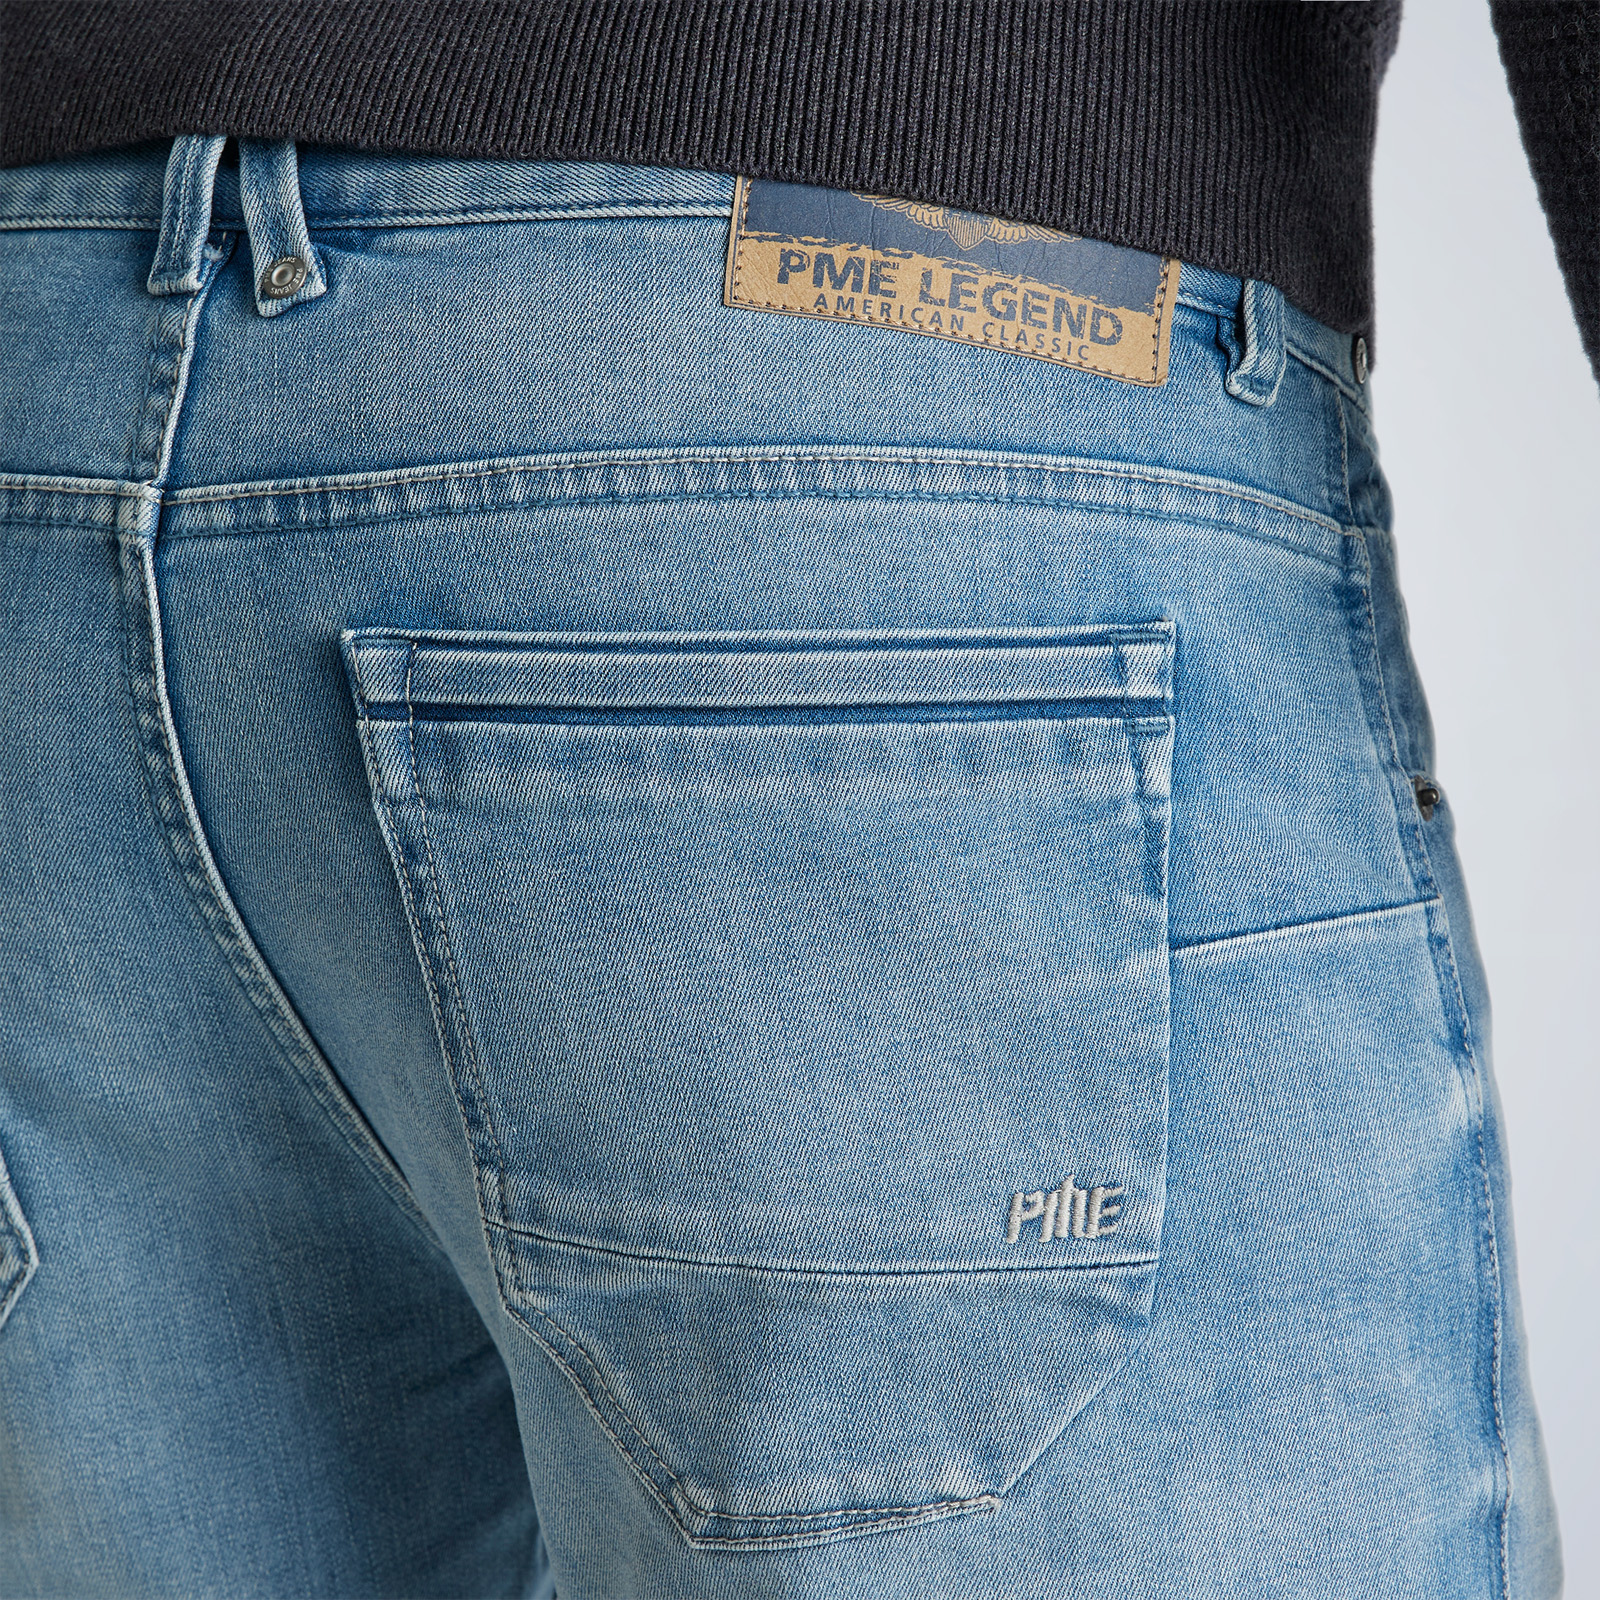 PME JEANS | PME Legend Jeans | Free shipping and returns